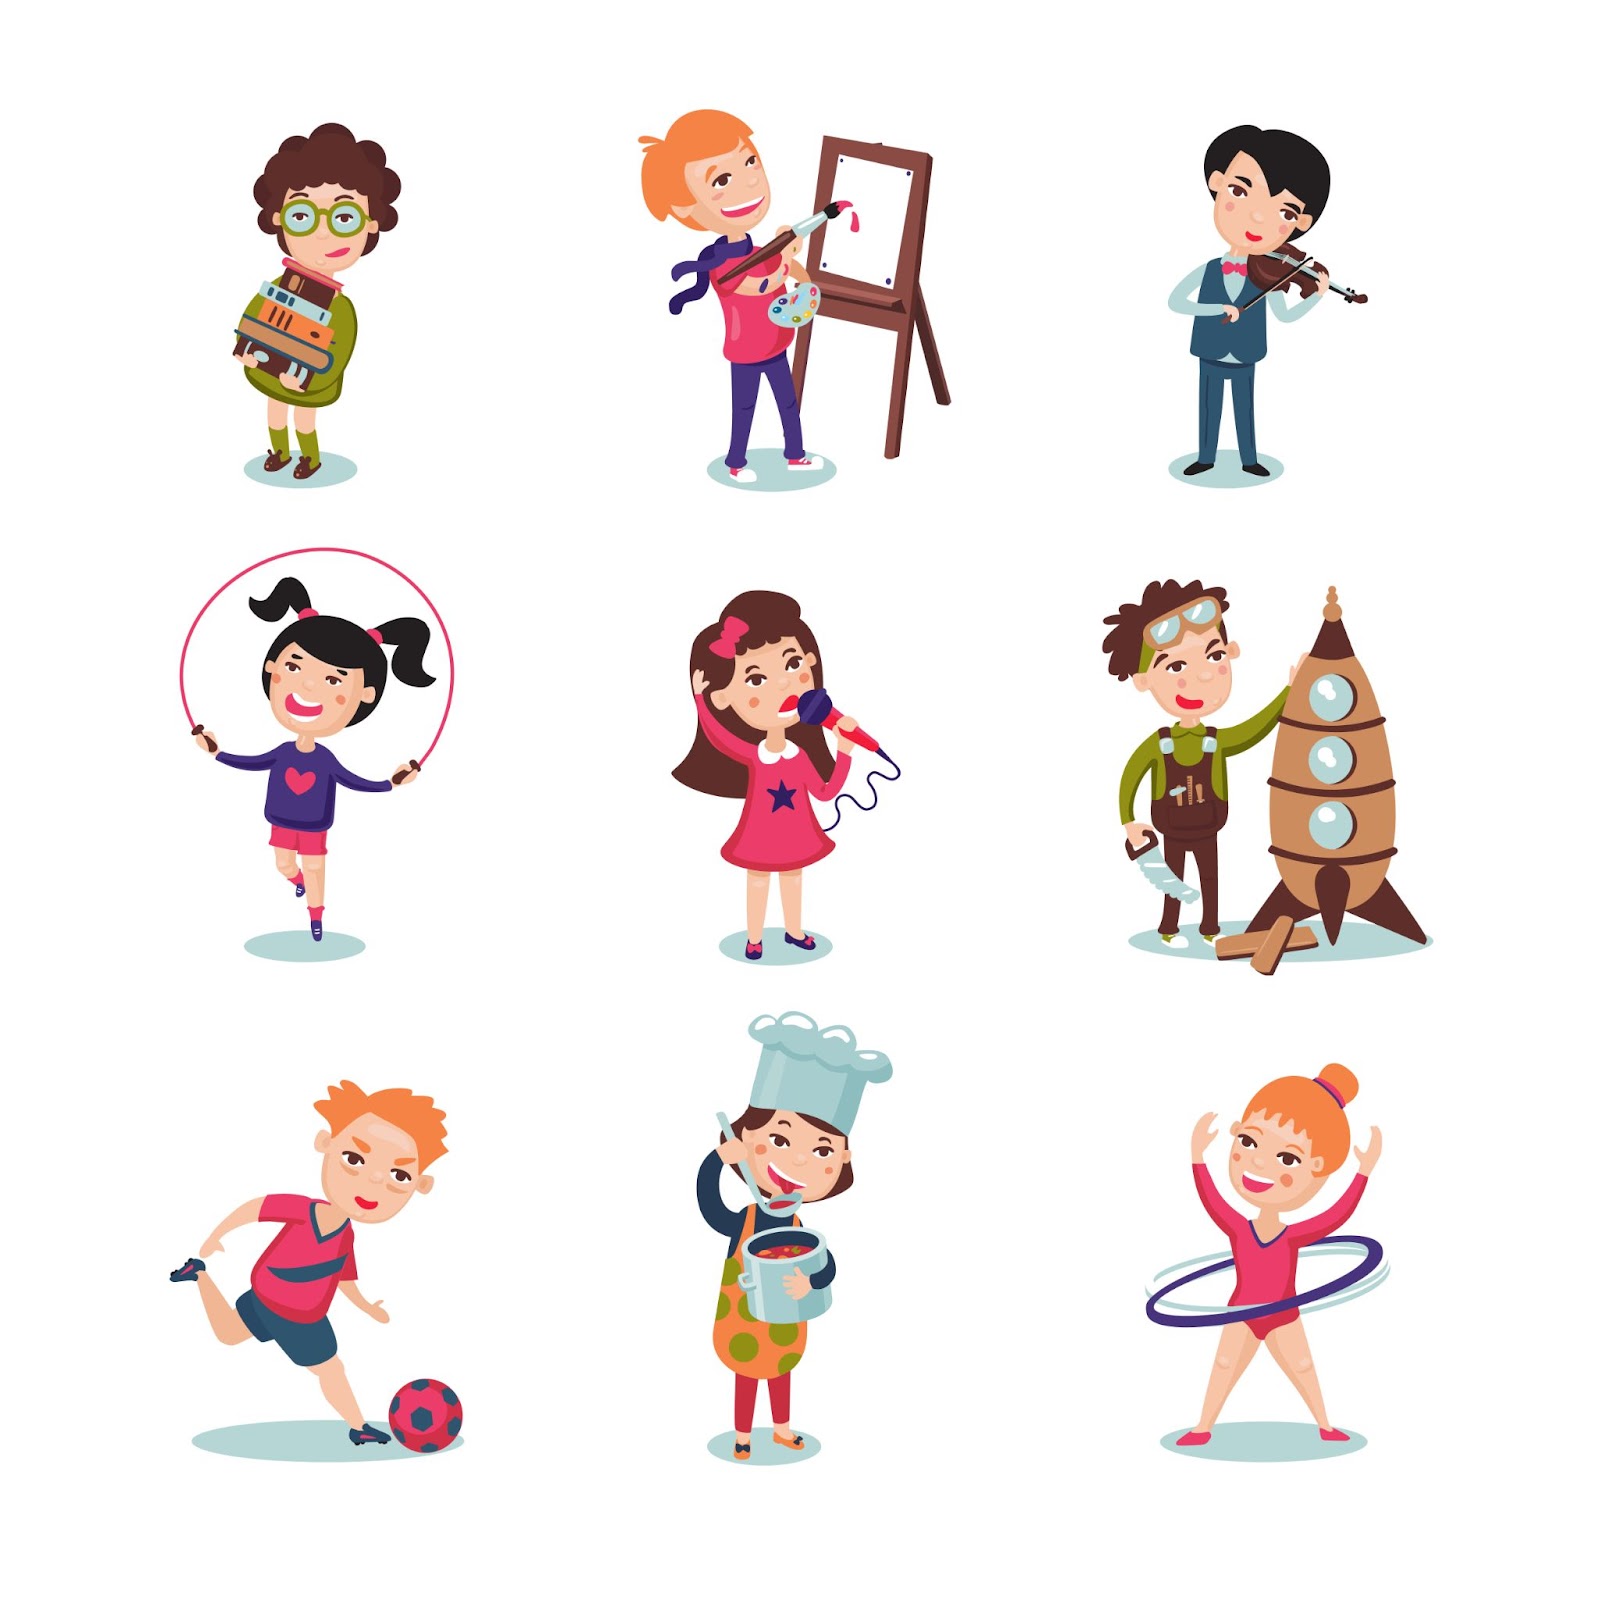 Free Vector  My hobby related, sports, activities, freetime illustration